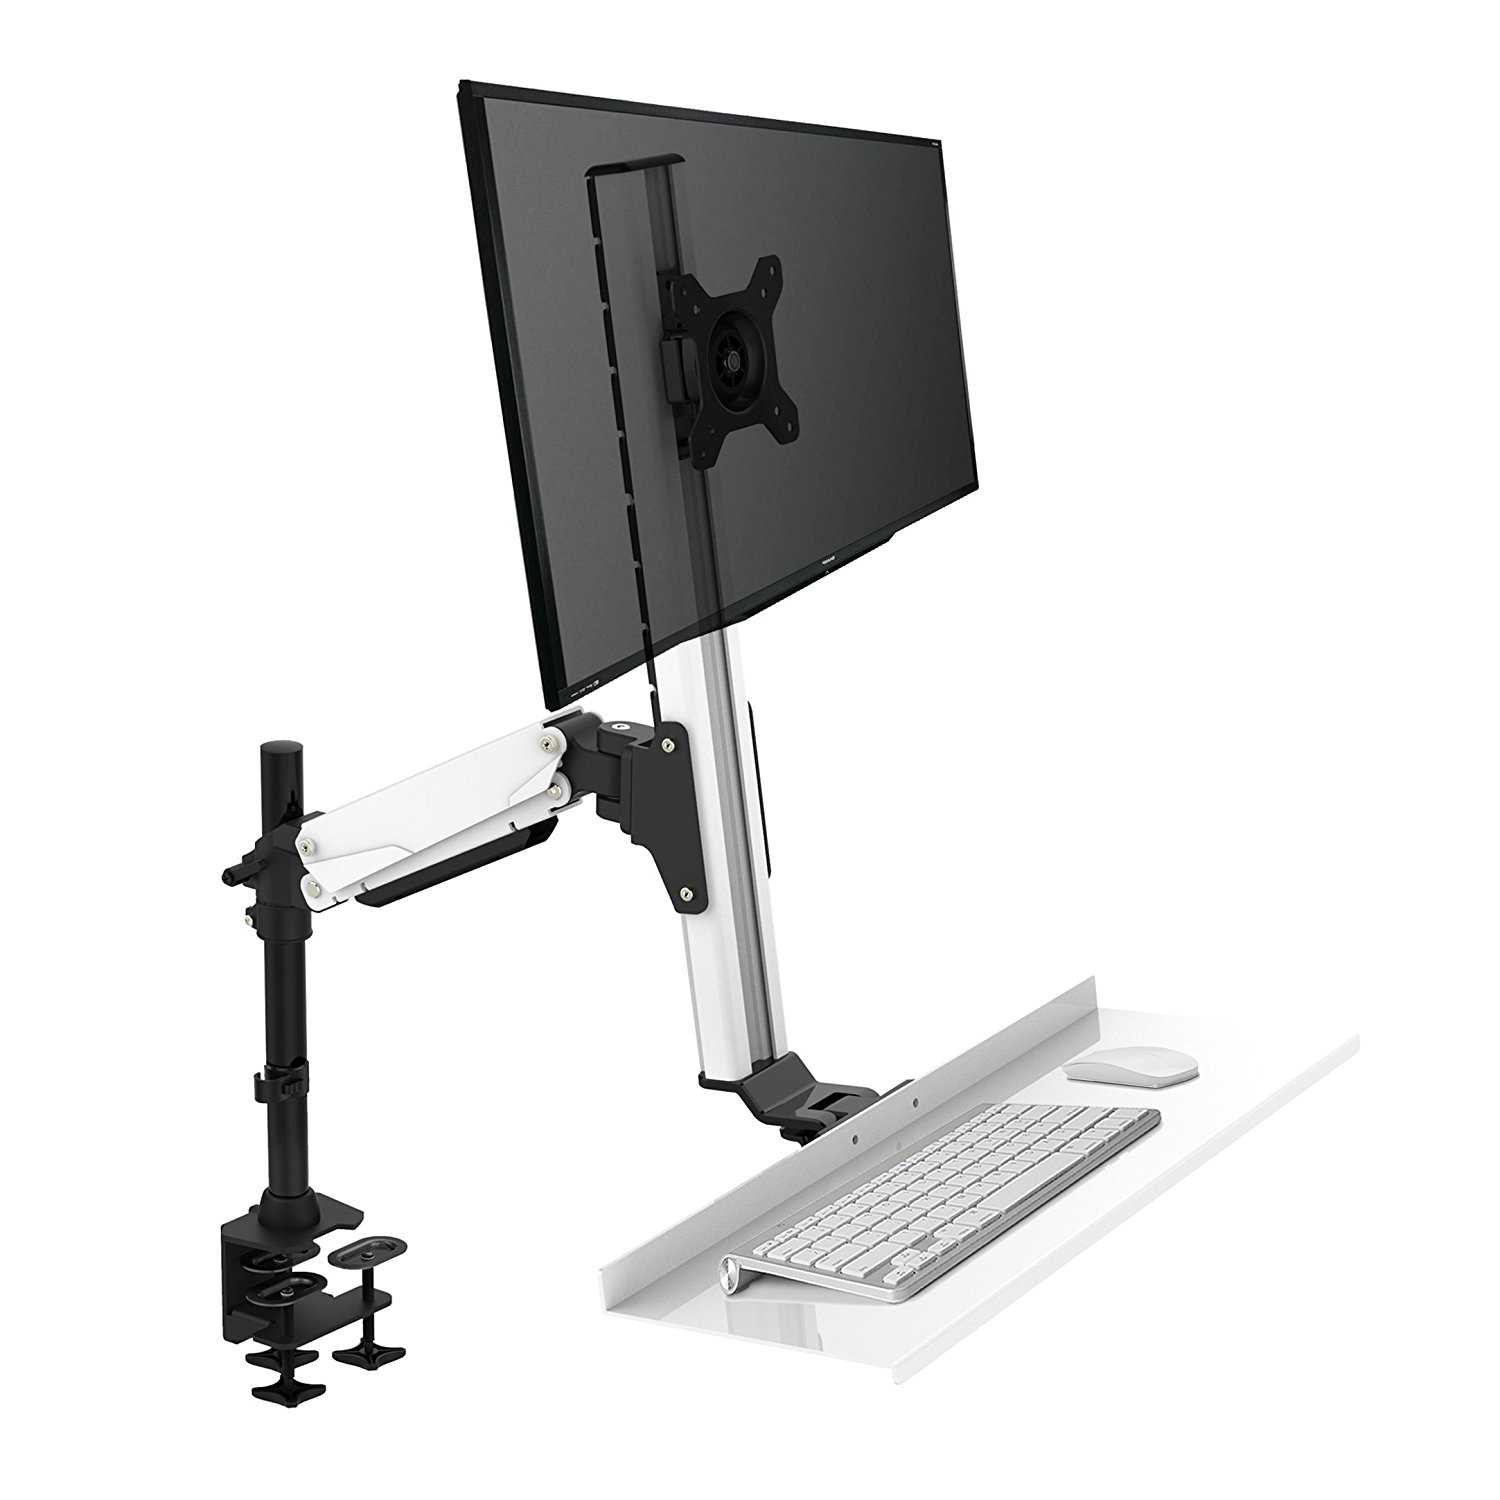 Adjustable Height Sit Stand Desk Mount up to 27 Inch Monitor Keyboard Tray